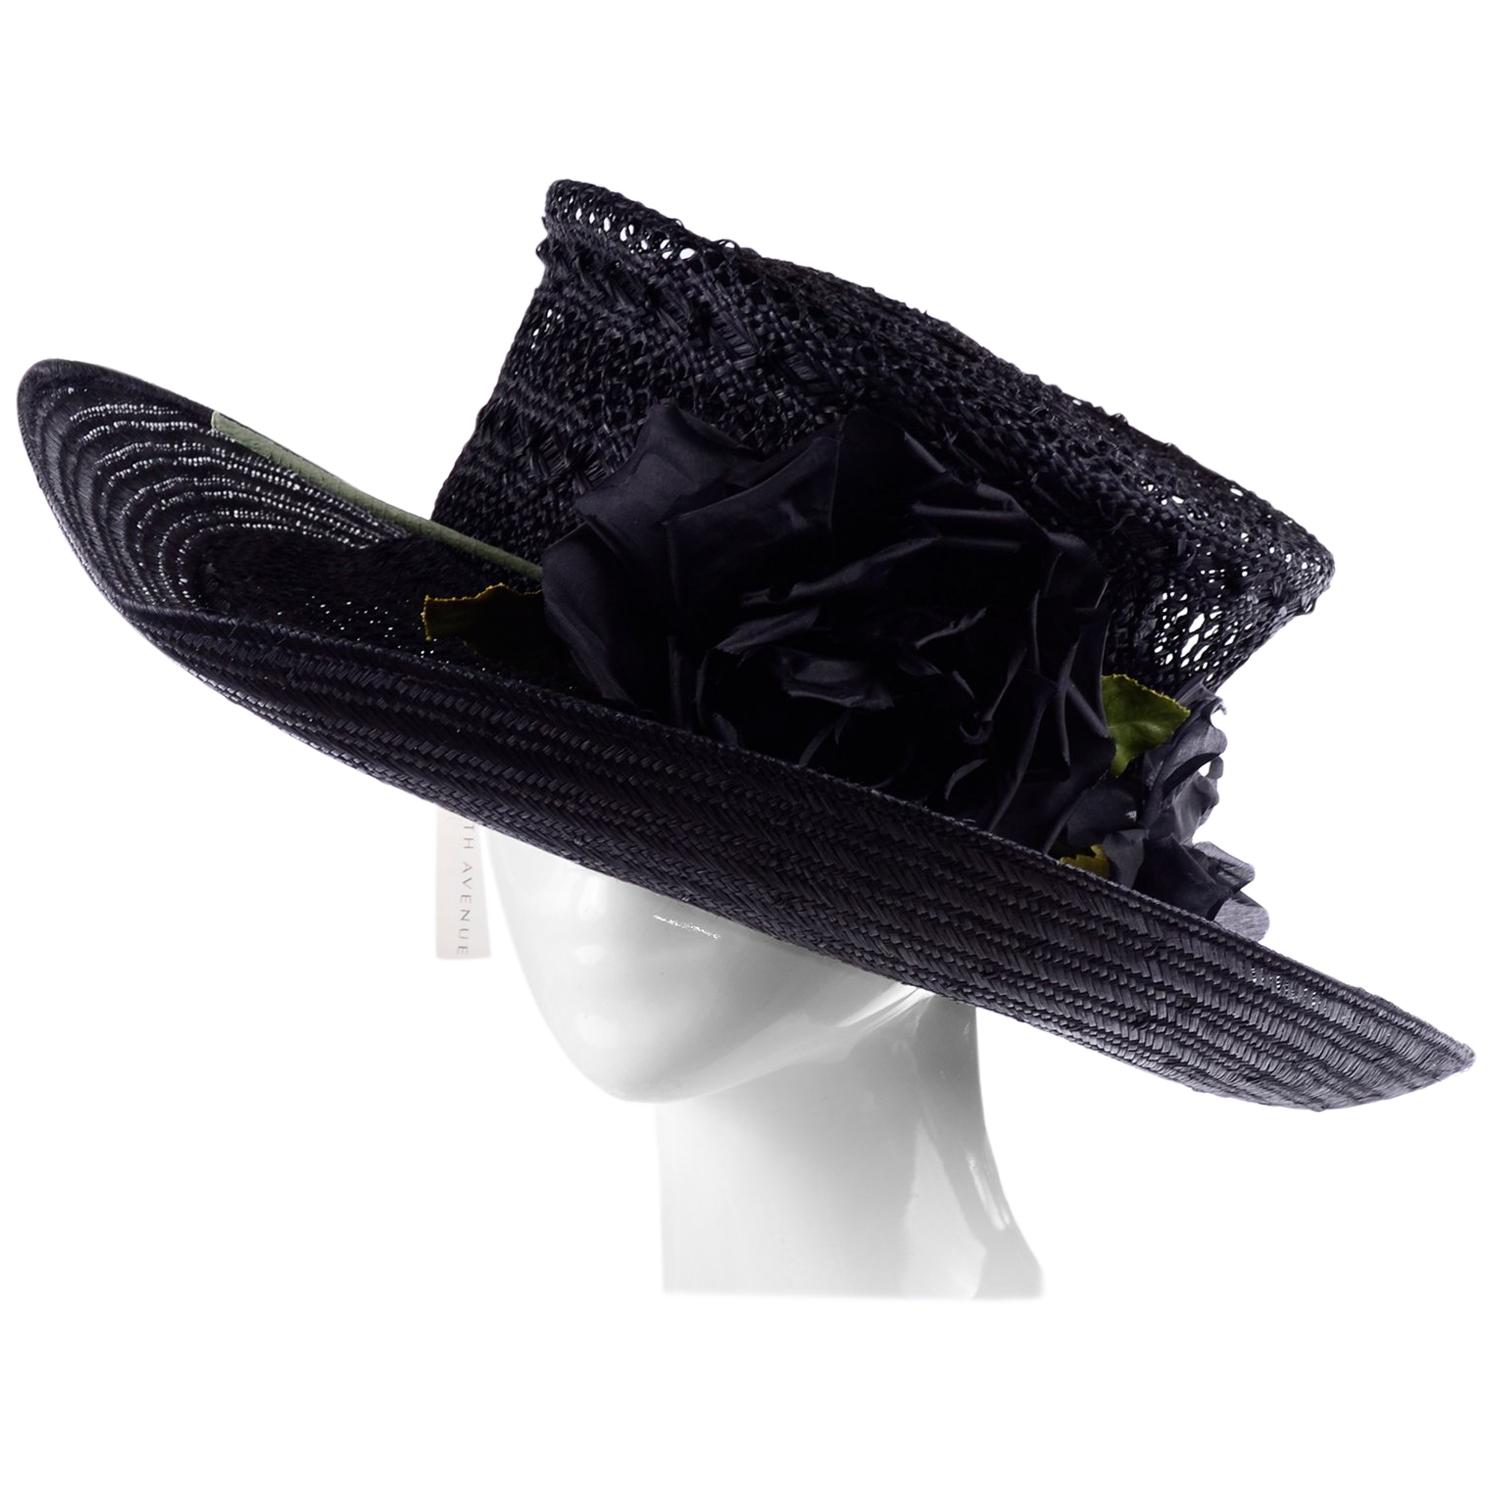 Deadstock Saks Fifth Avenue Vintage Black Straw Upturned Brim Hat New With Tags